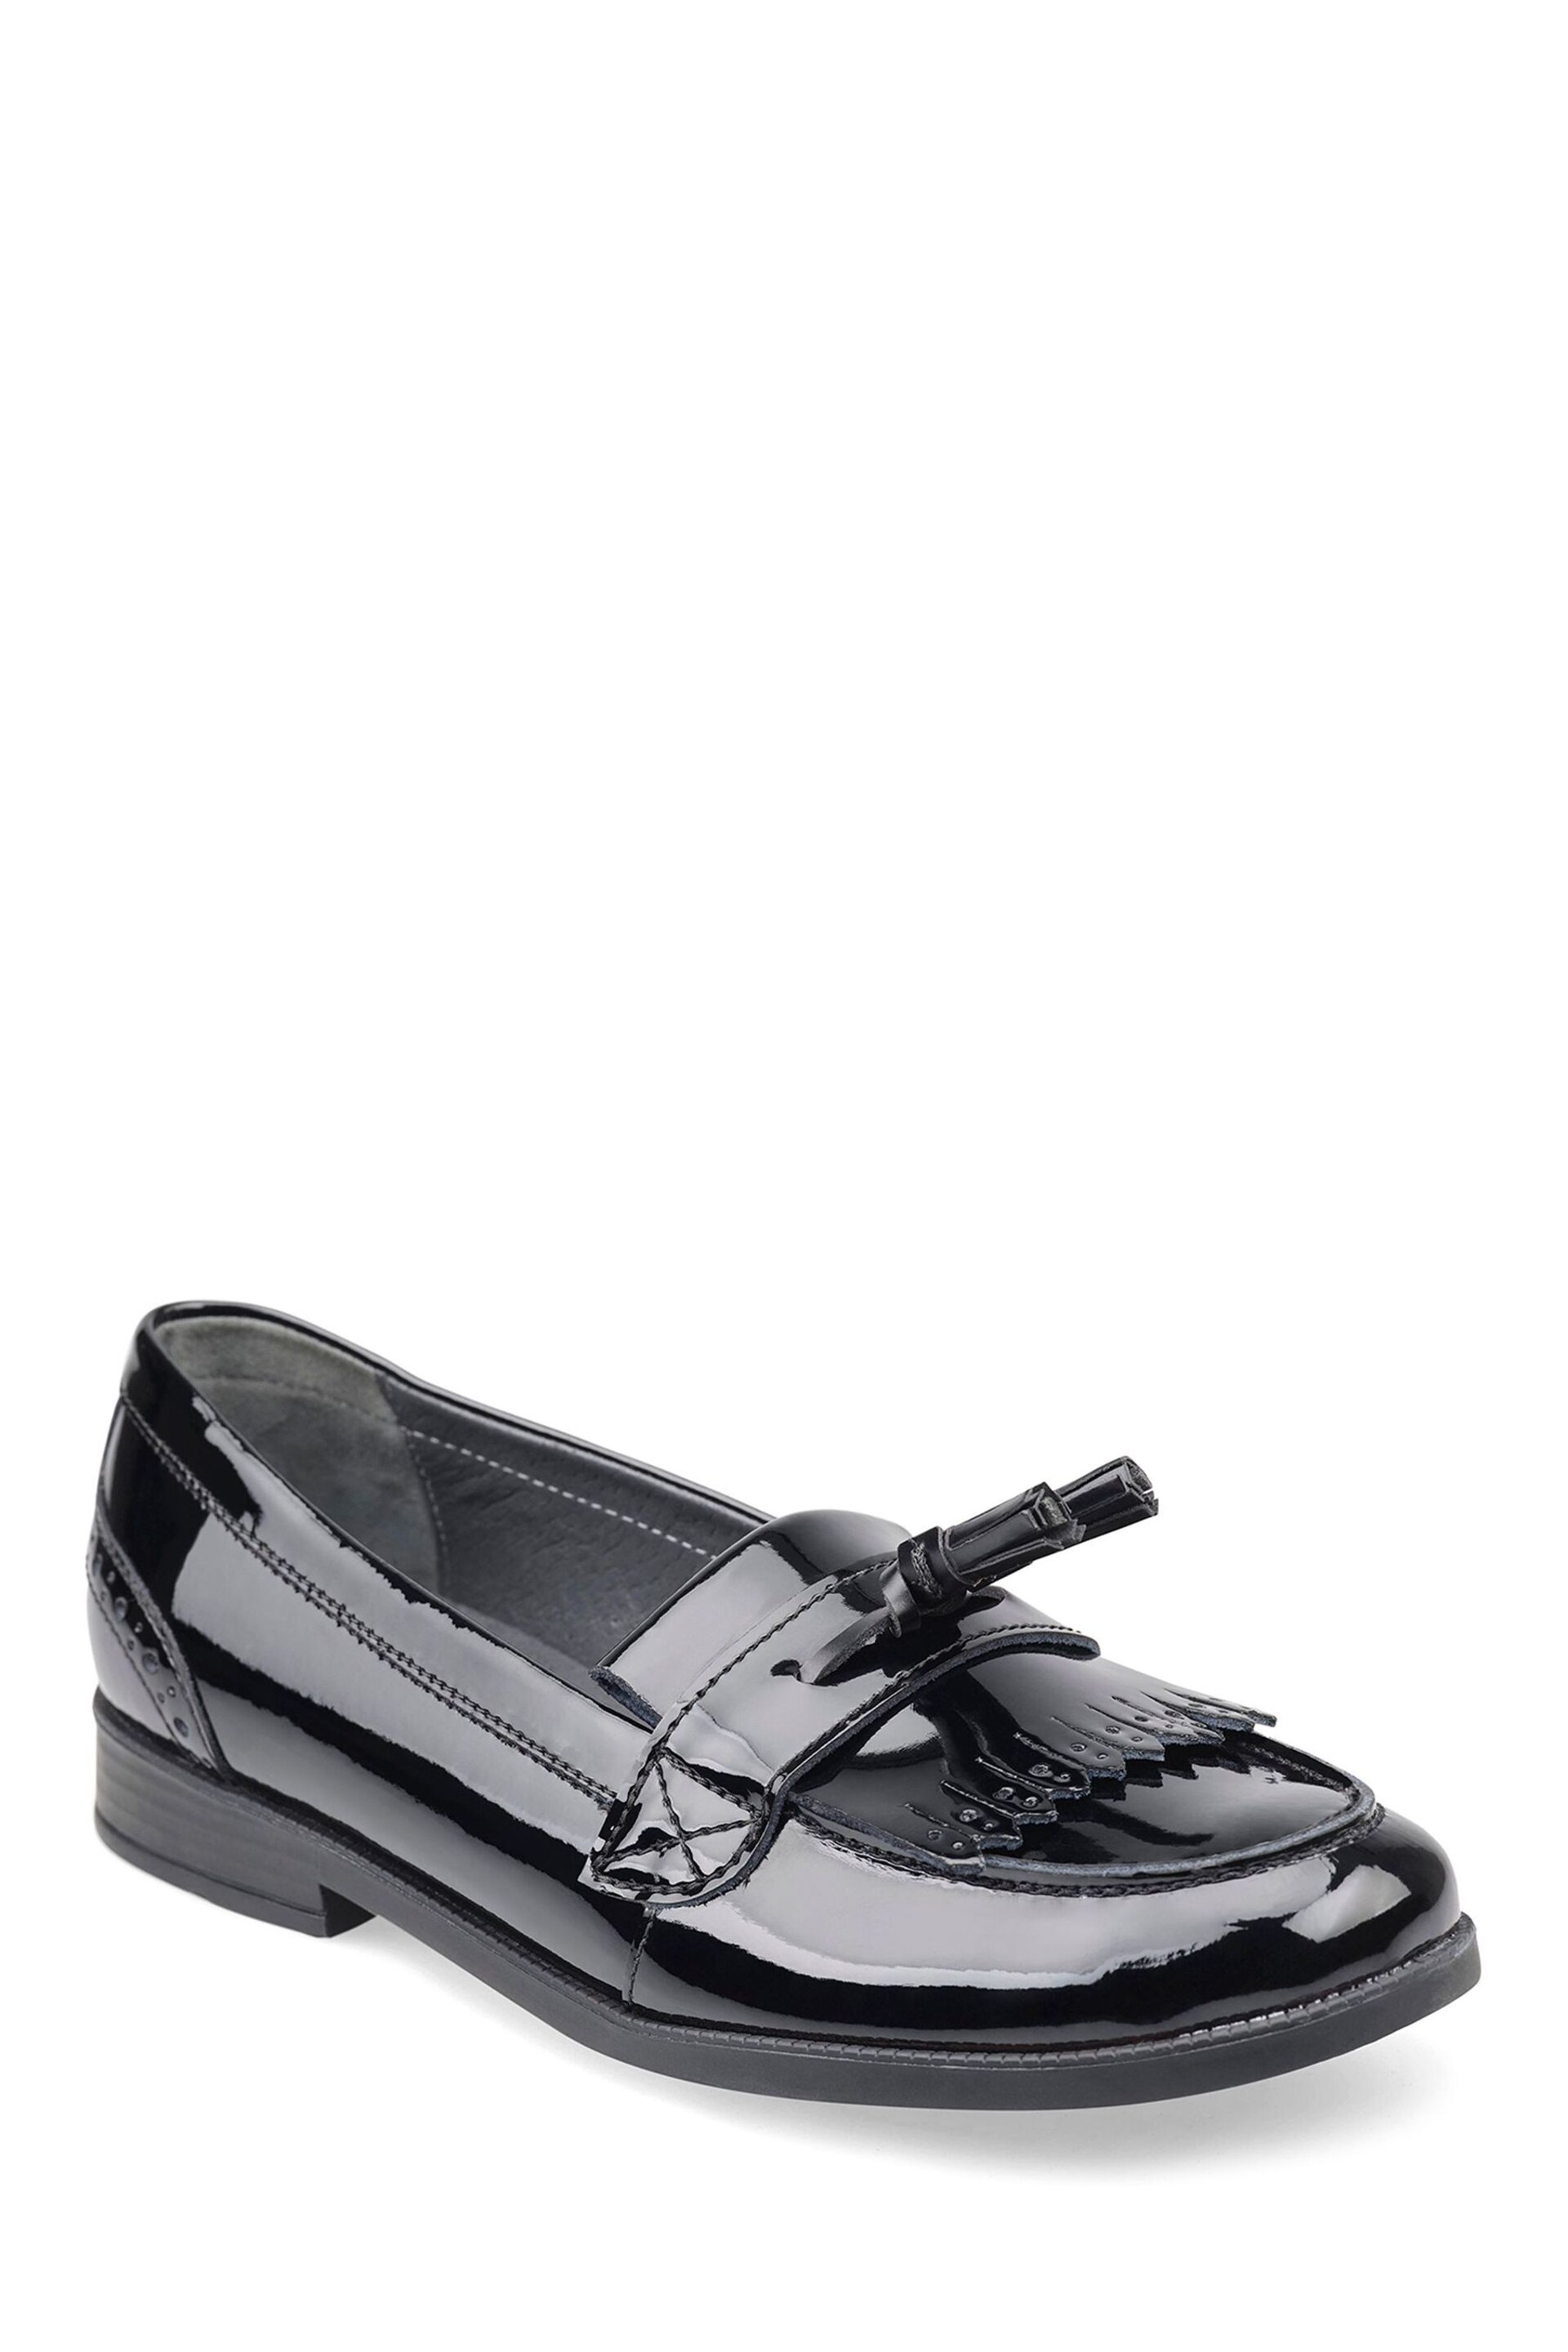 Start Rite Girls Sketch Slip On Black Leather School Shoes - F Fit - Image 4 of 8